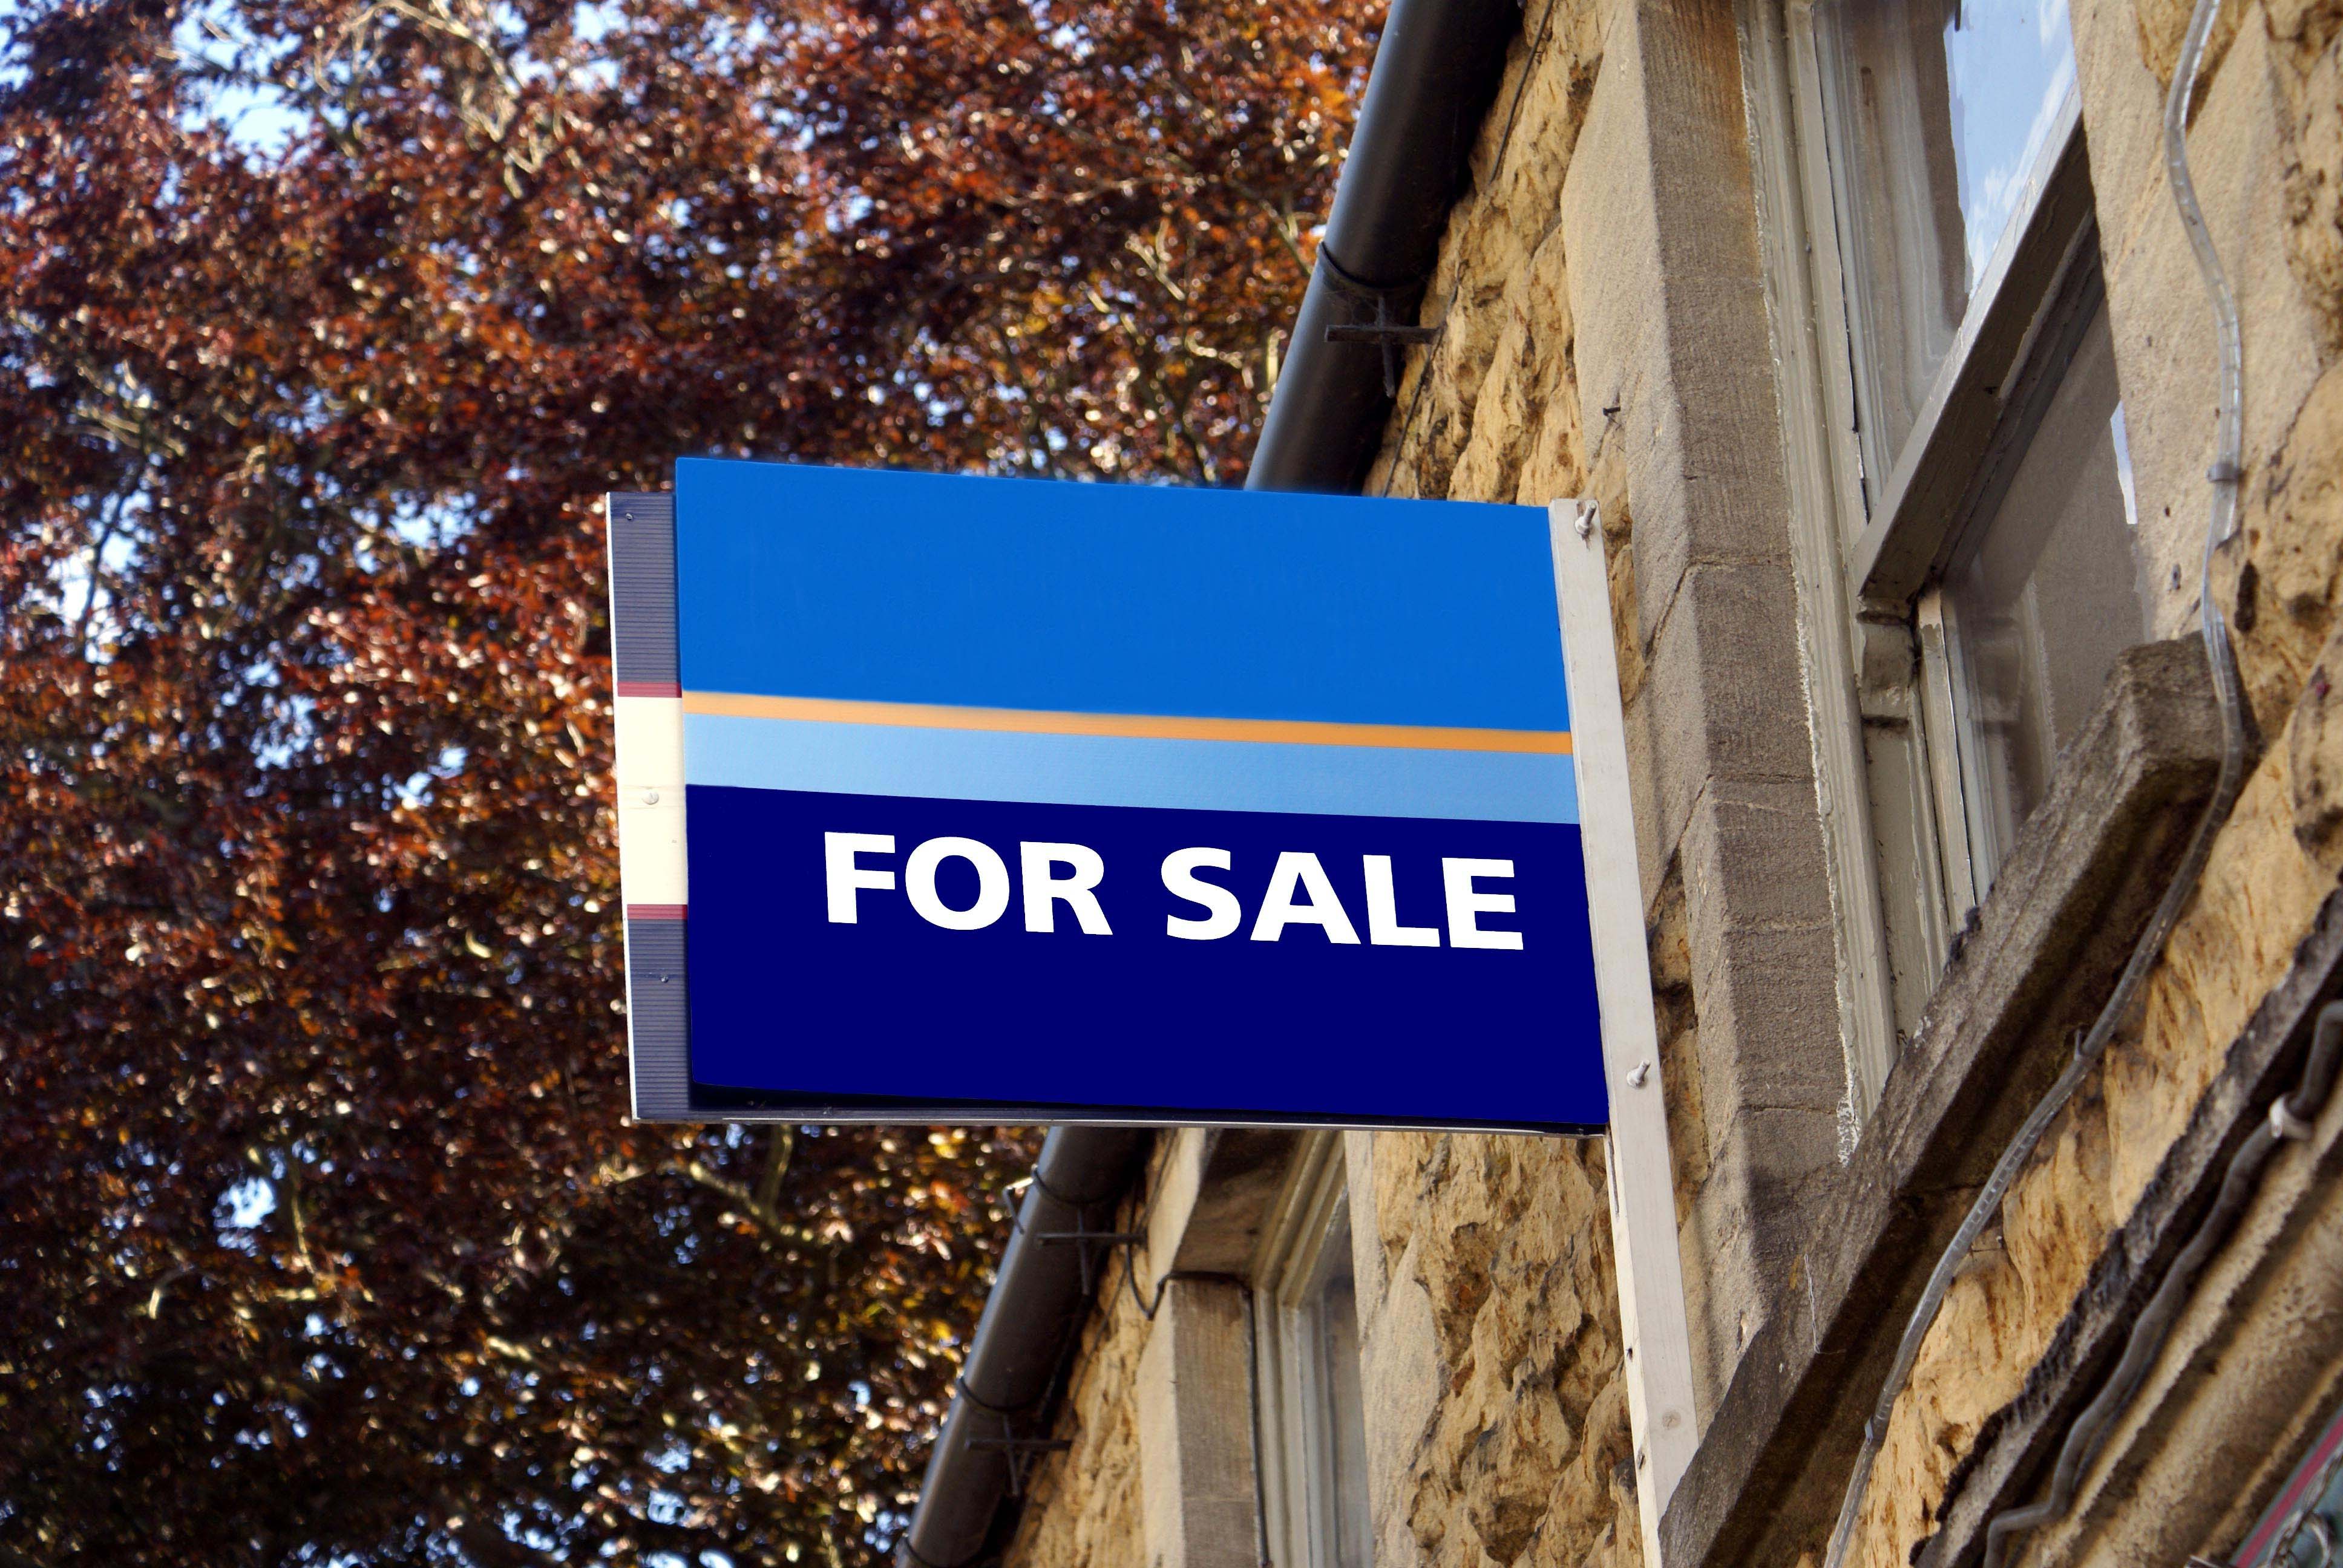 Housing supply to tick up as valuation requests jump – Rightmove